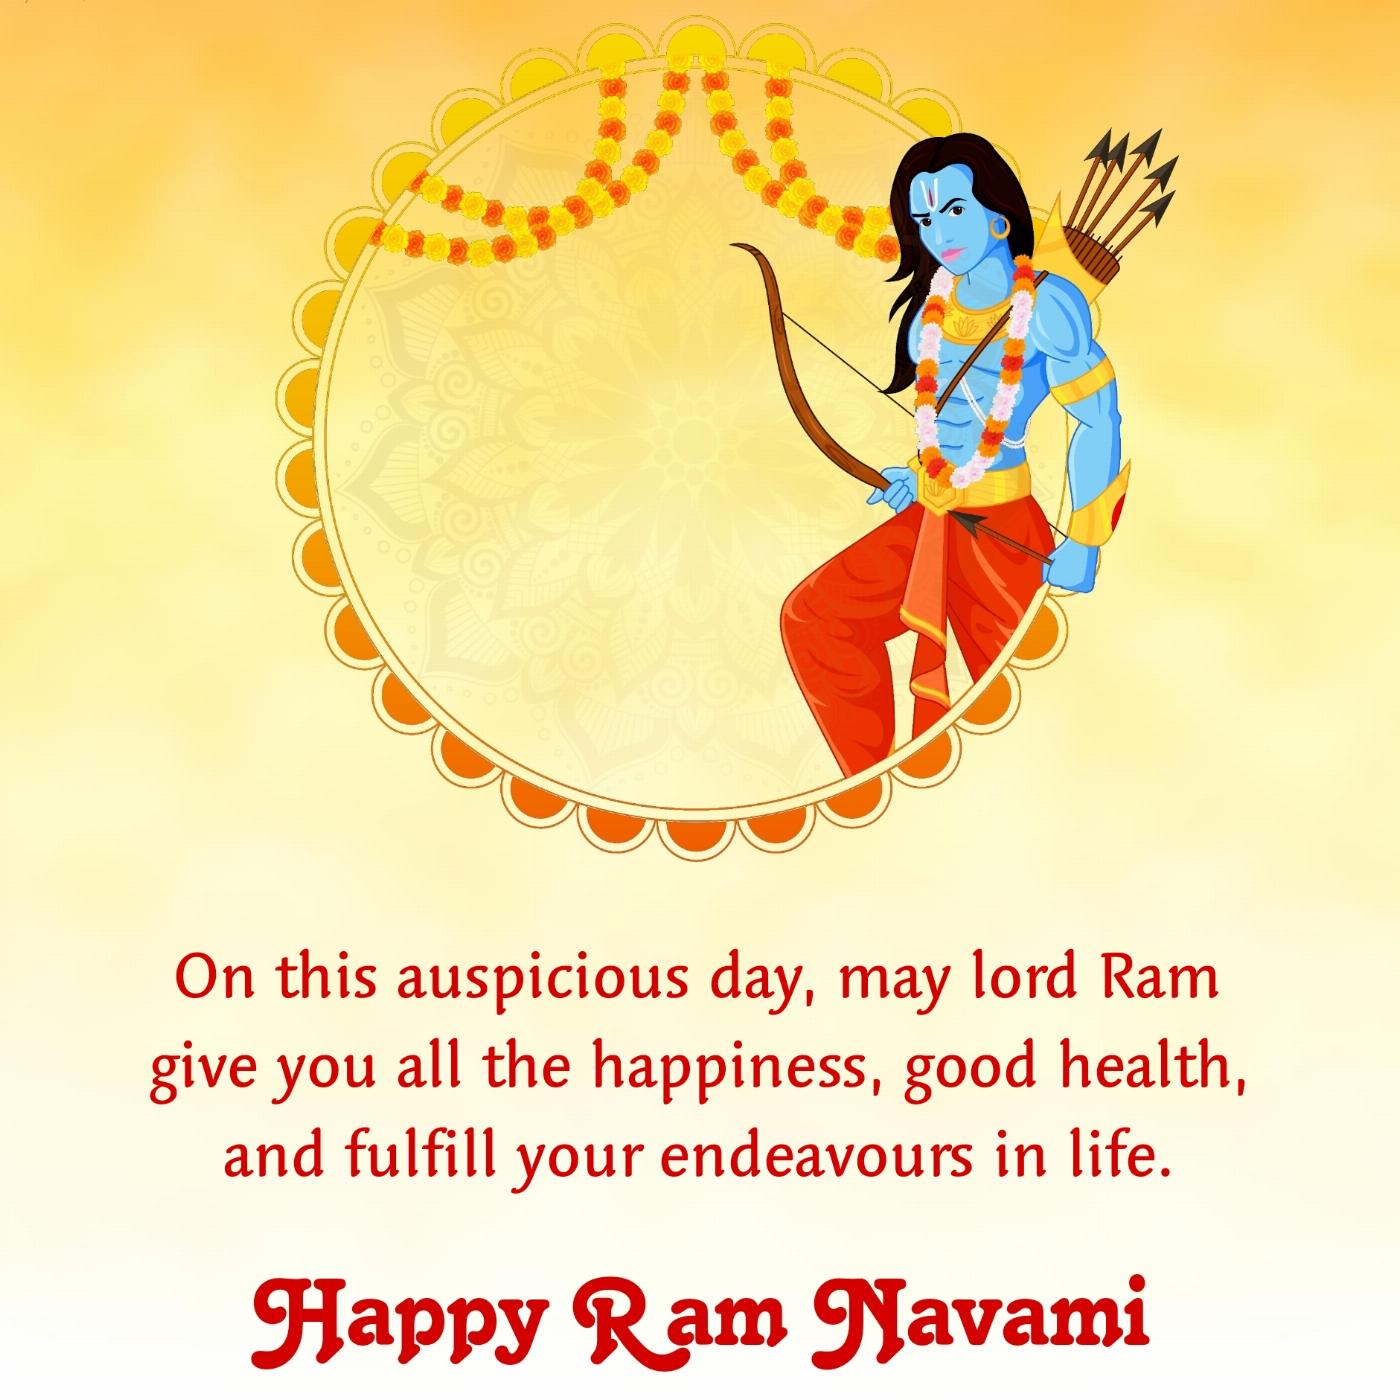 On this auspicious day may lord Ram give you all the happiness